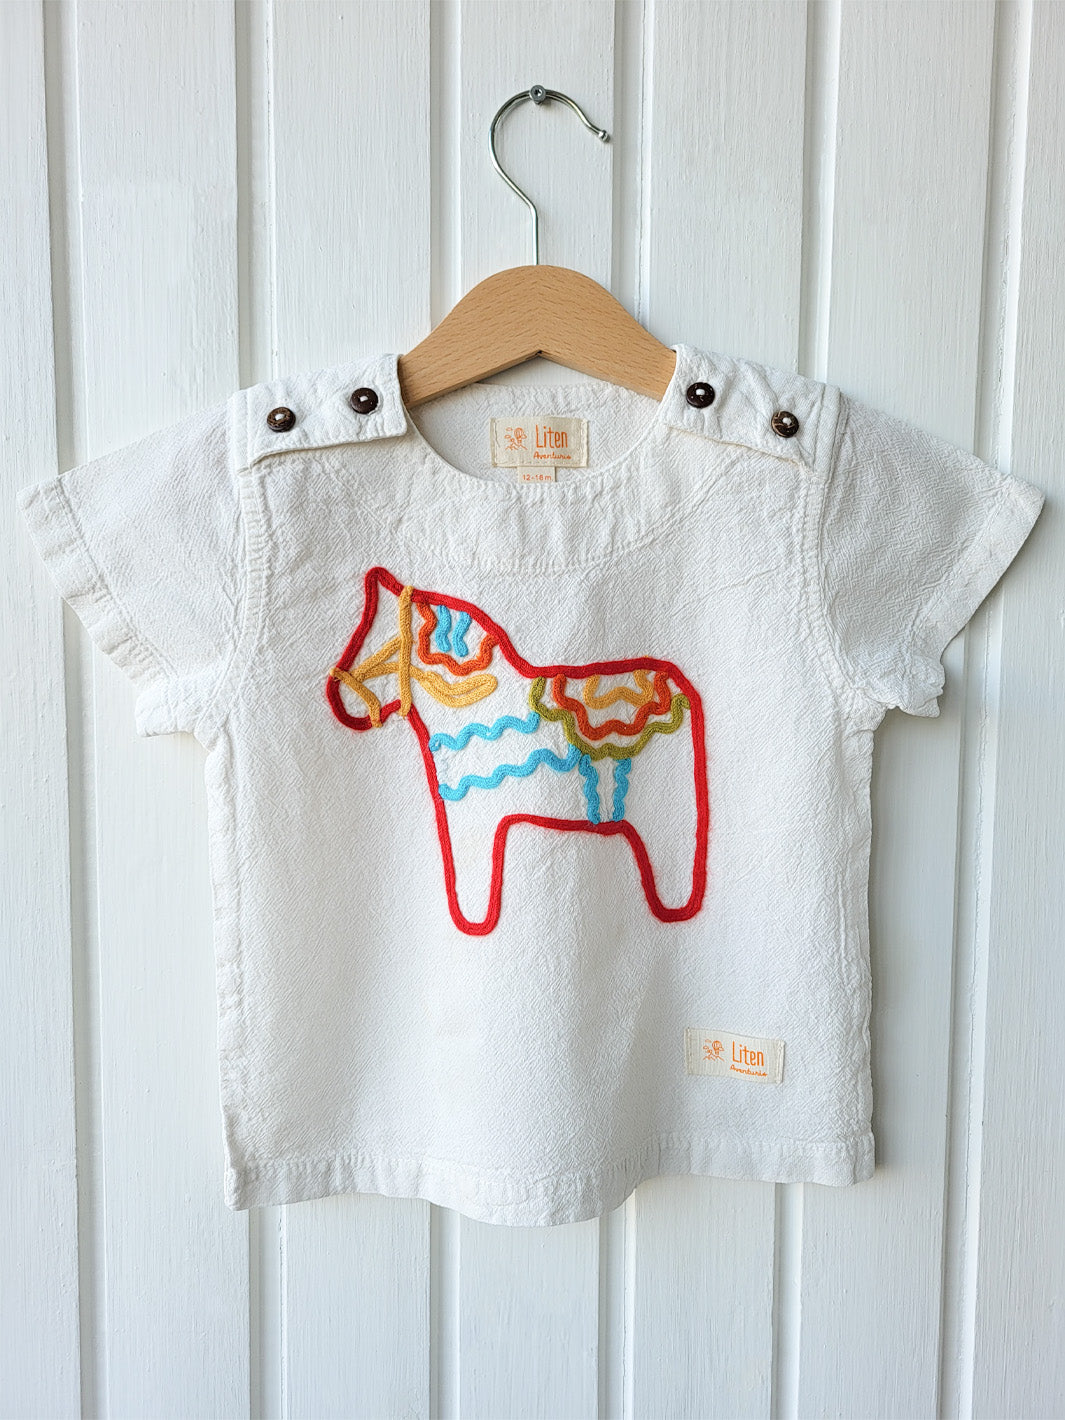 Dala white T-shirt made of natural cotton, with beautifully embroidered symbolic horse | Pojken och flickan tröja